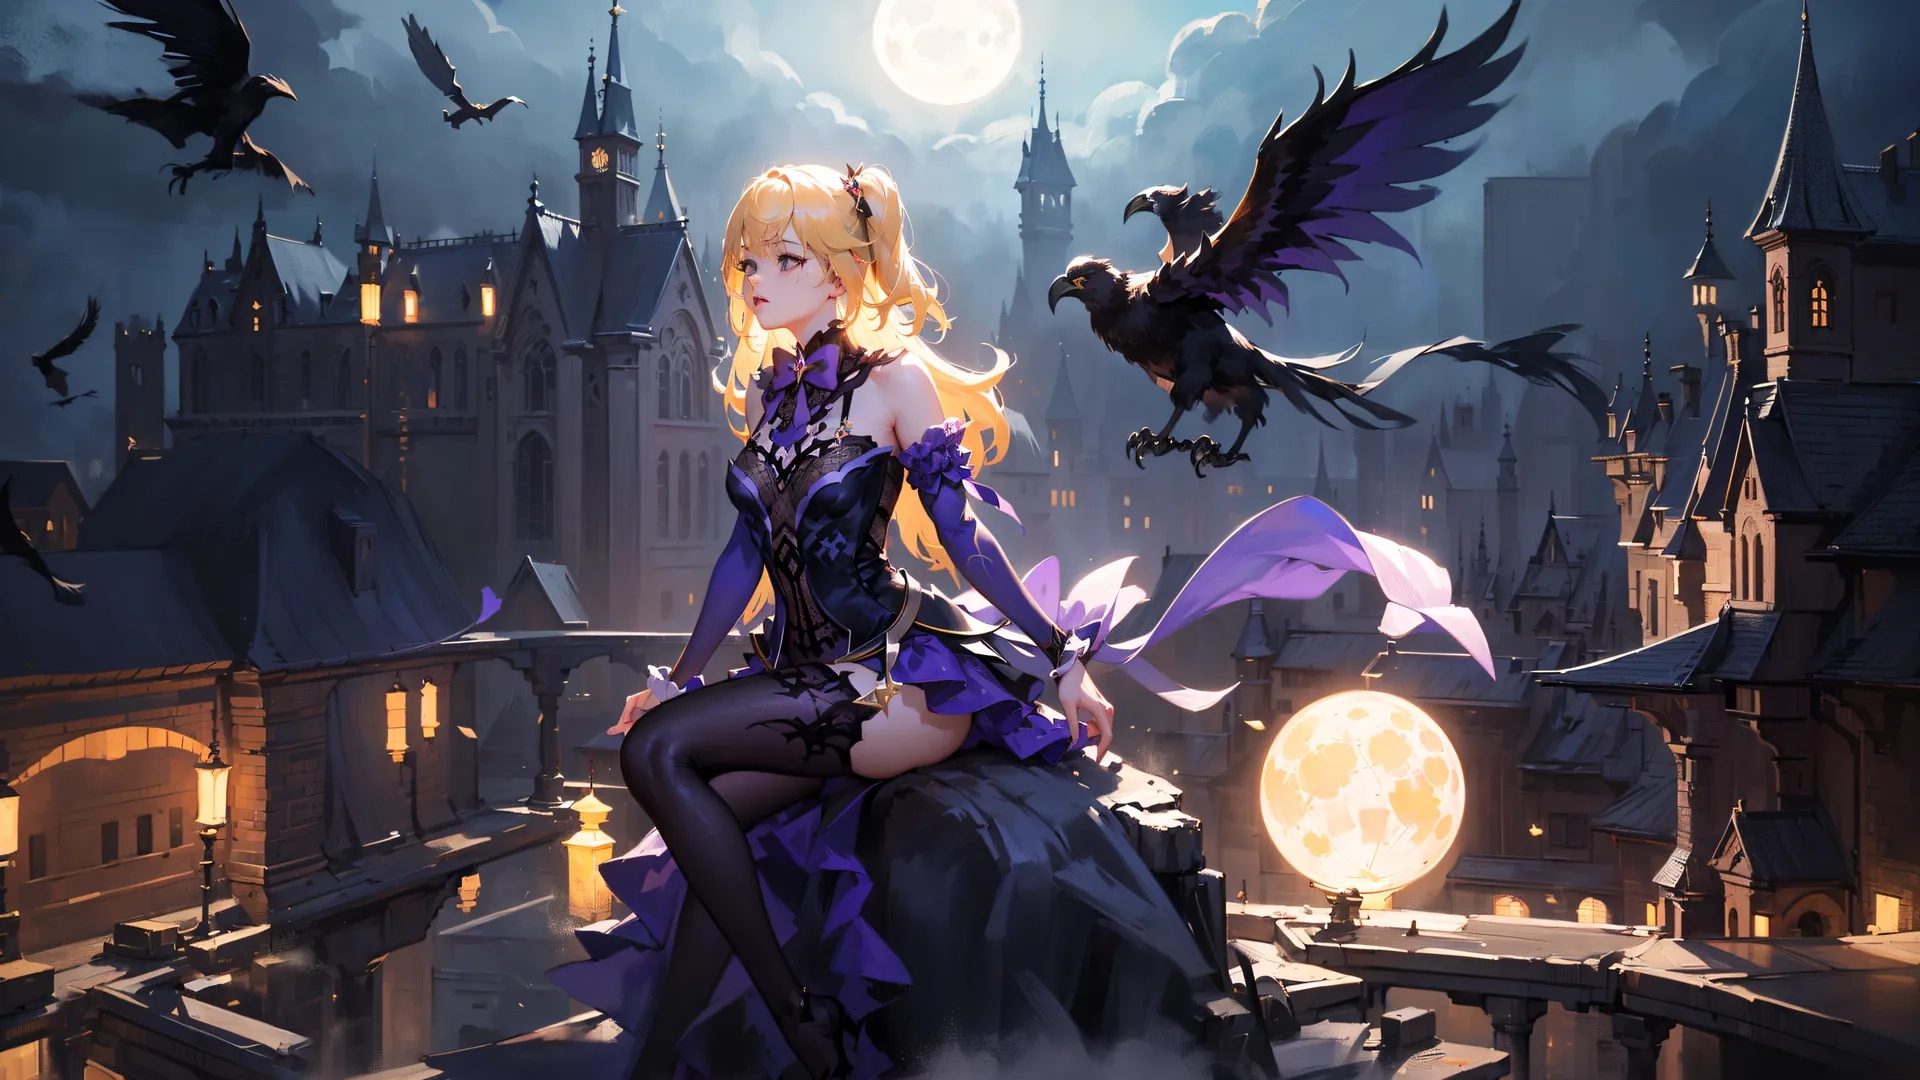 the young woman is seated with bats and a raven over her shoulder to fly through the sky near a castle with two buildings and a full moon,
